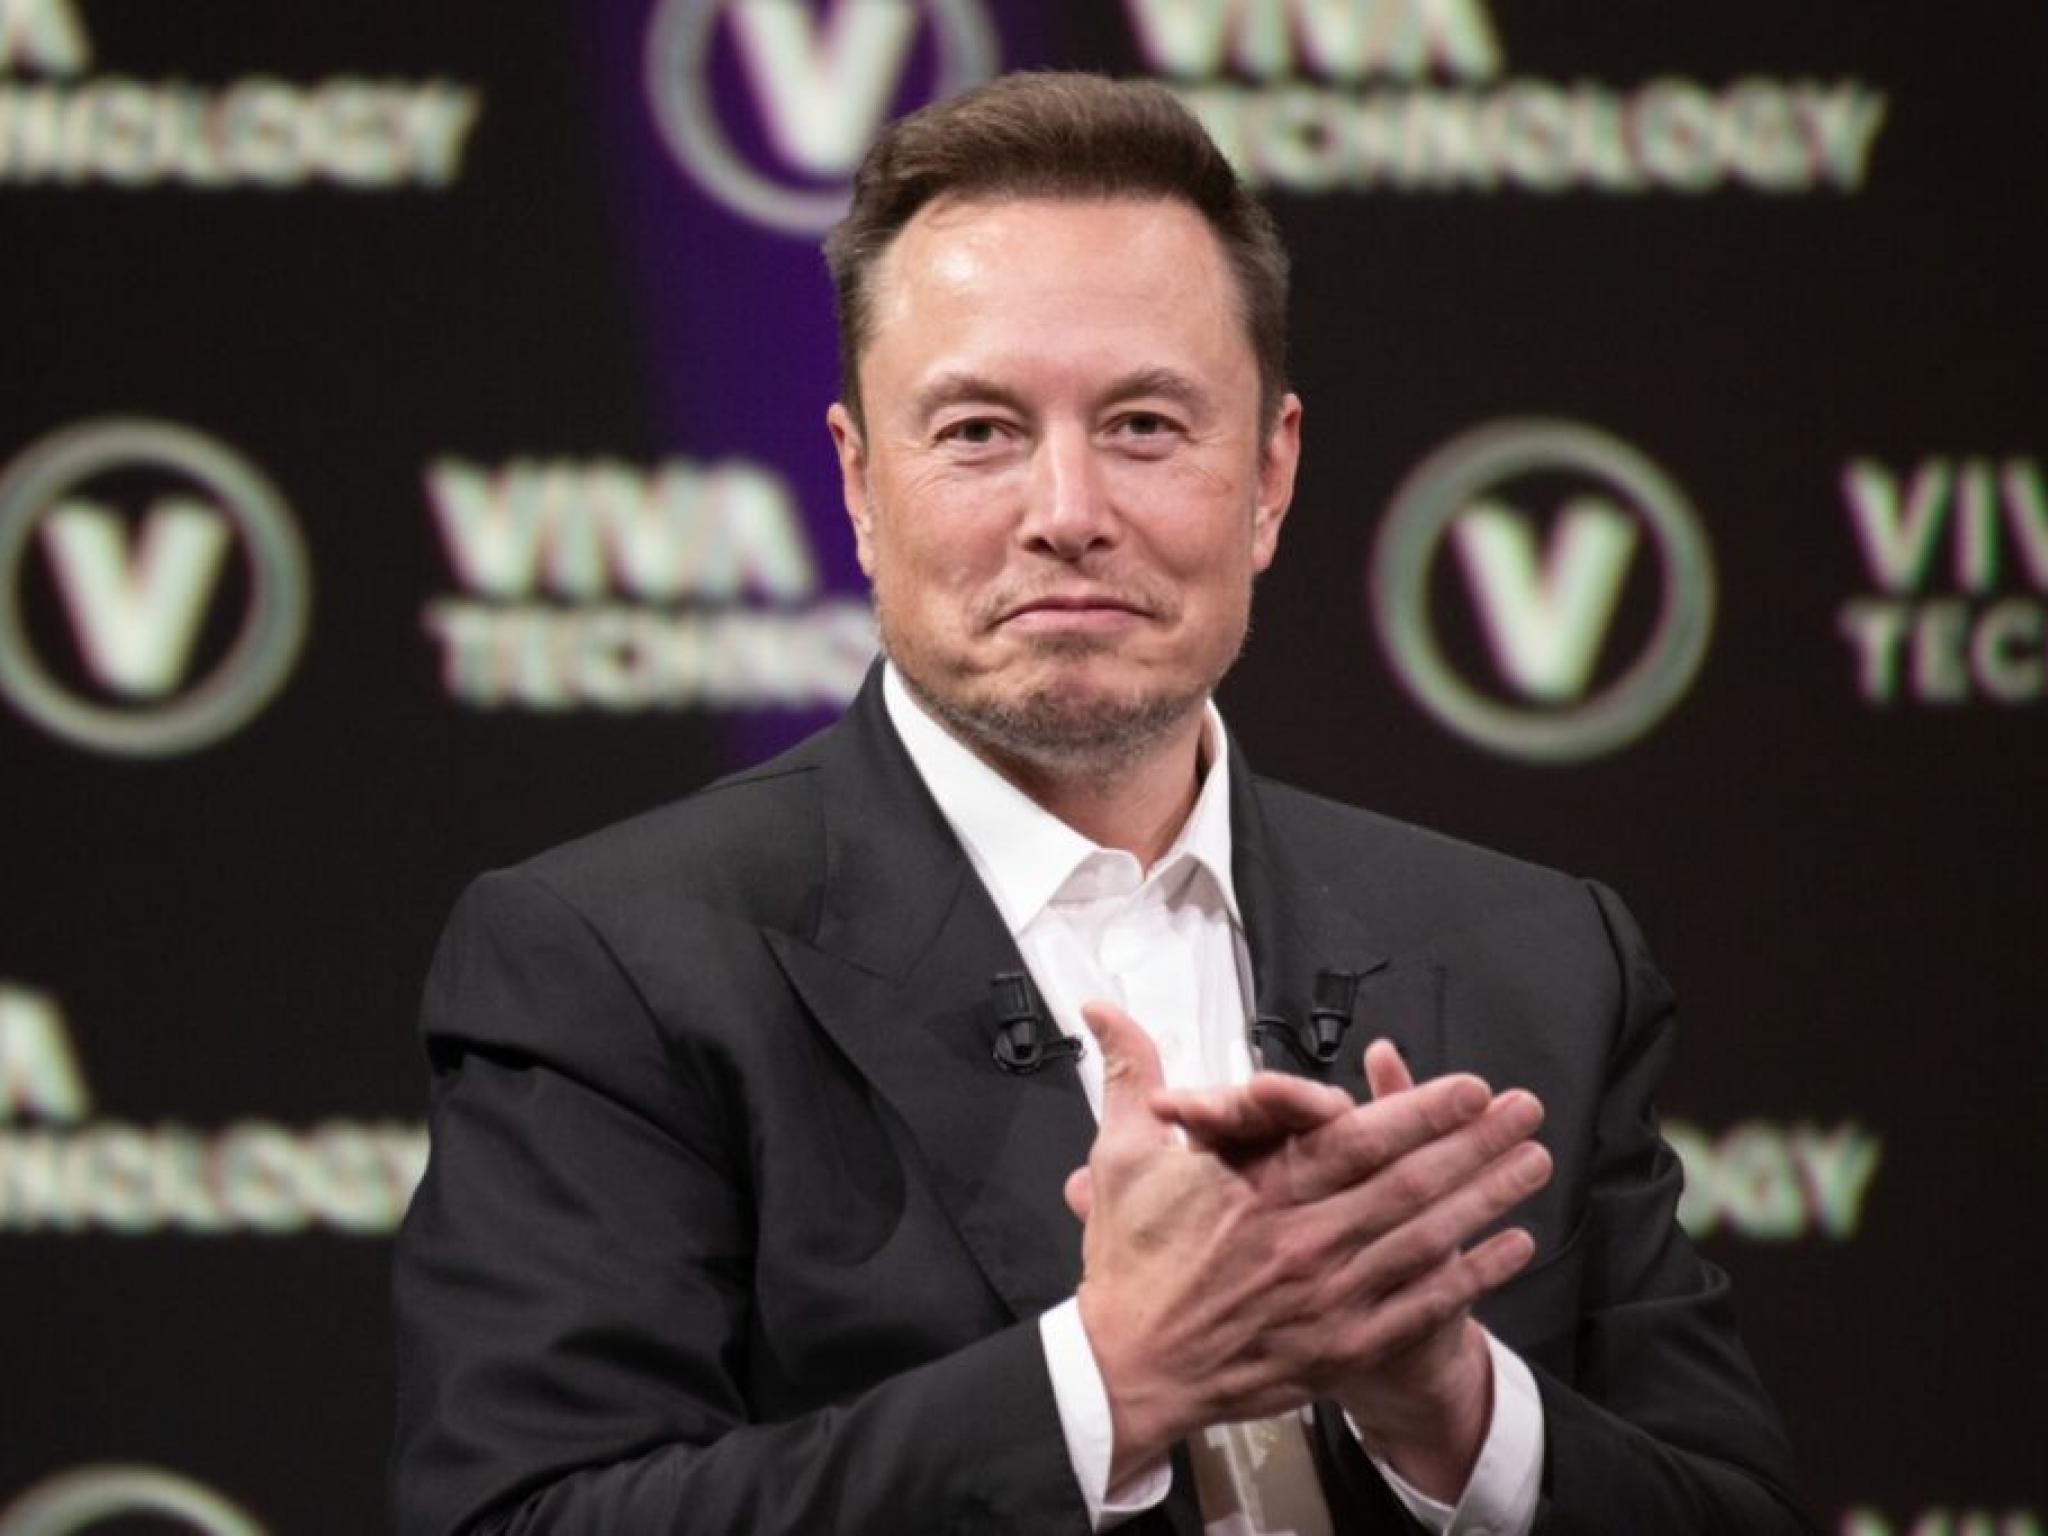  elon-musk-wowed-by-apples-biggest-stock-buyback--will-tesla-follow-suit-or-remain-stuck-in-category-5-storm 